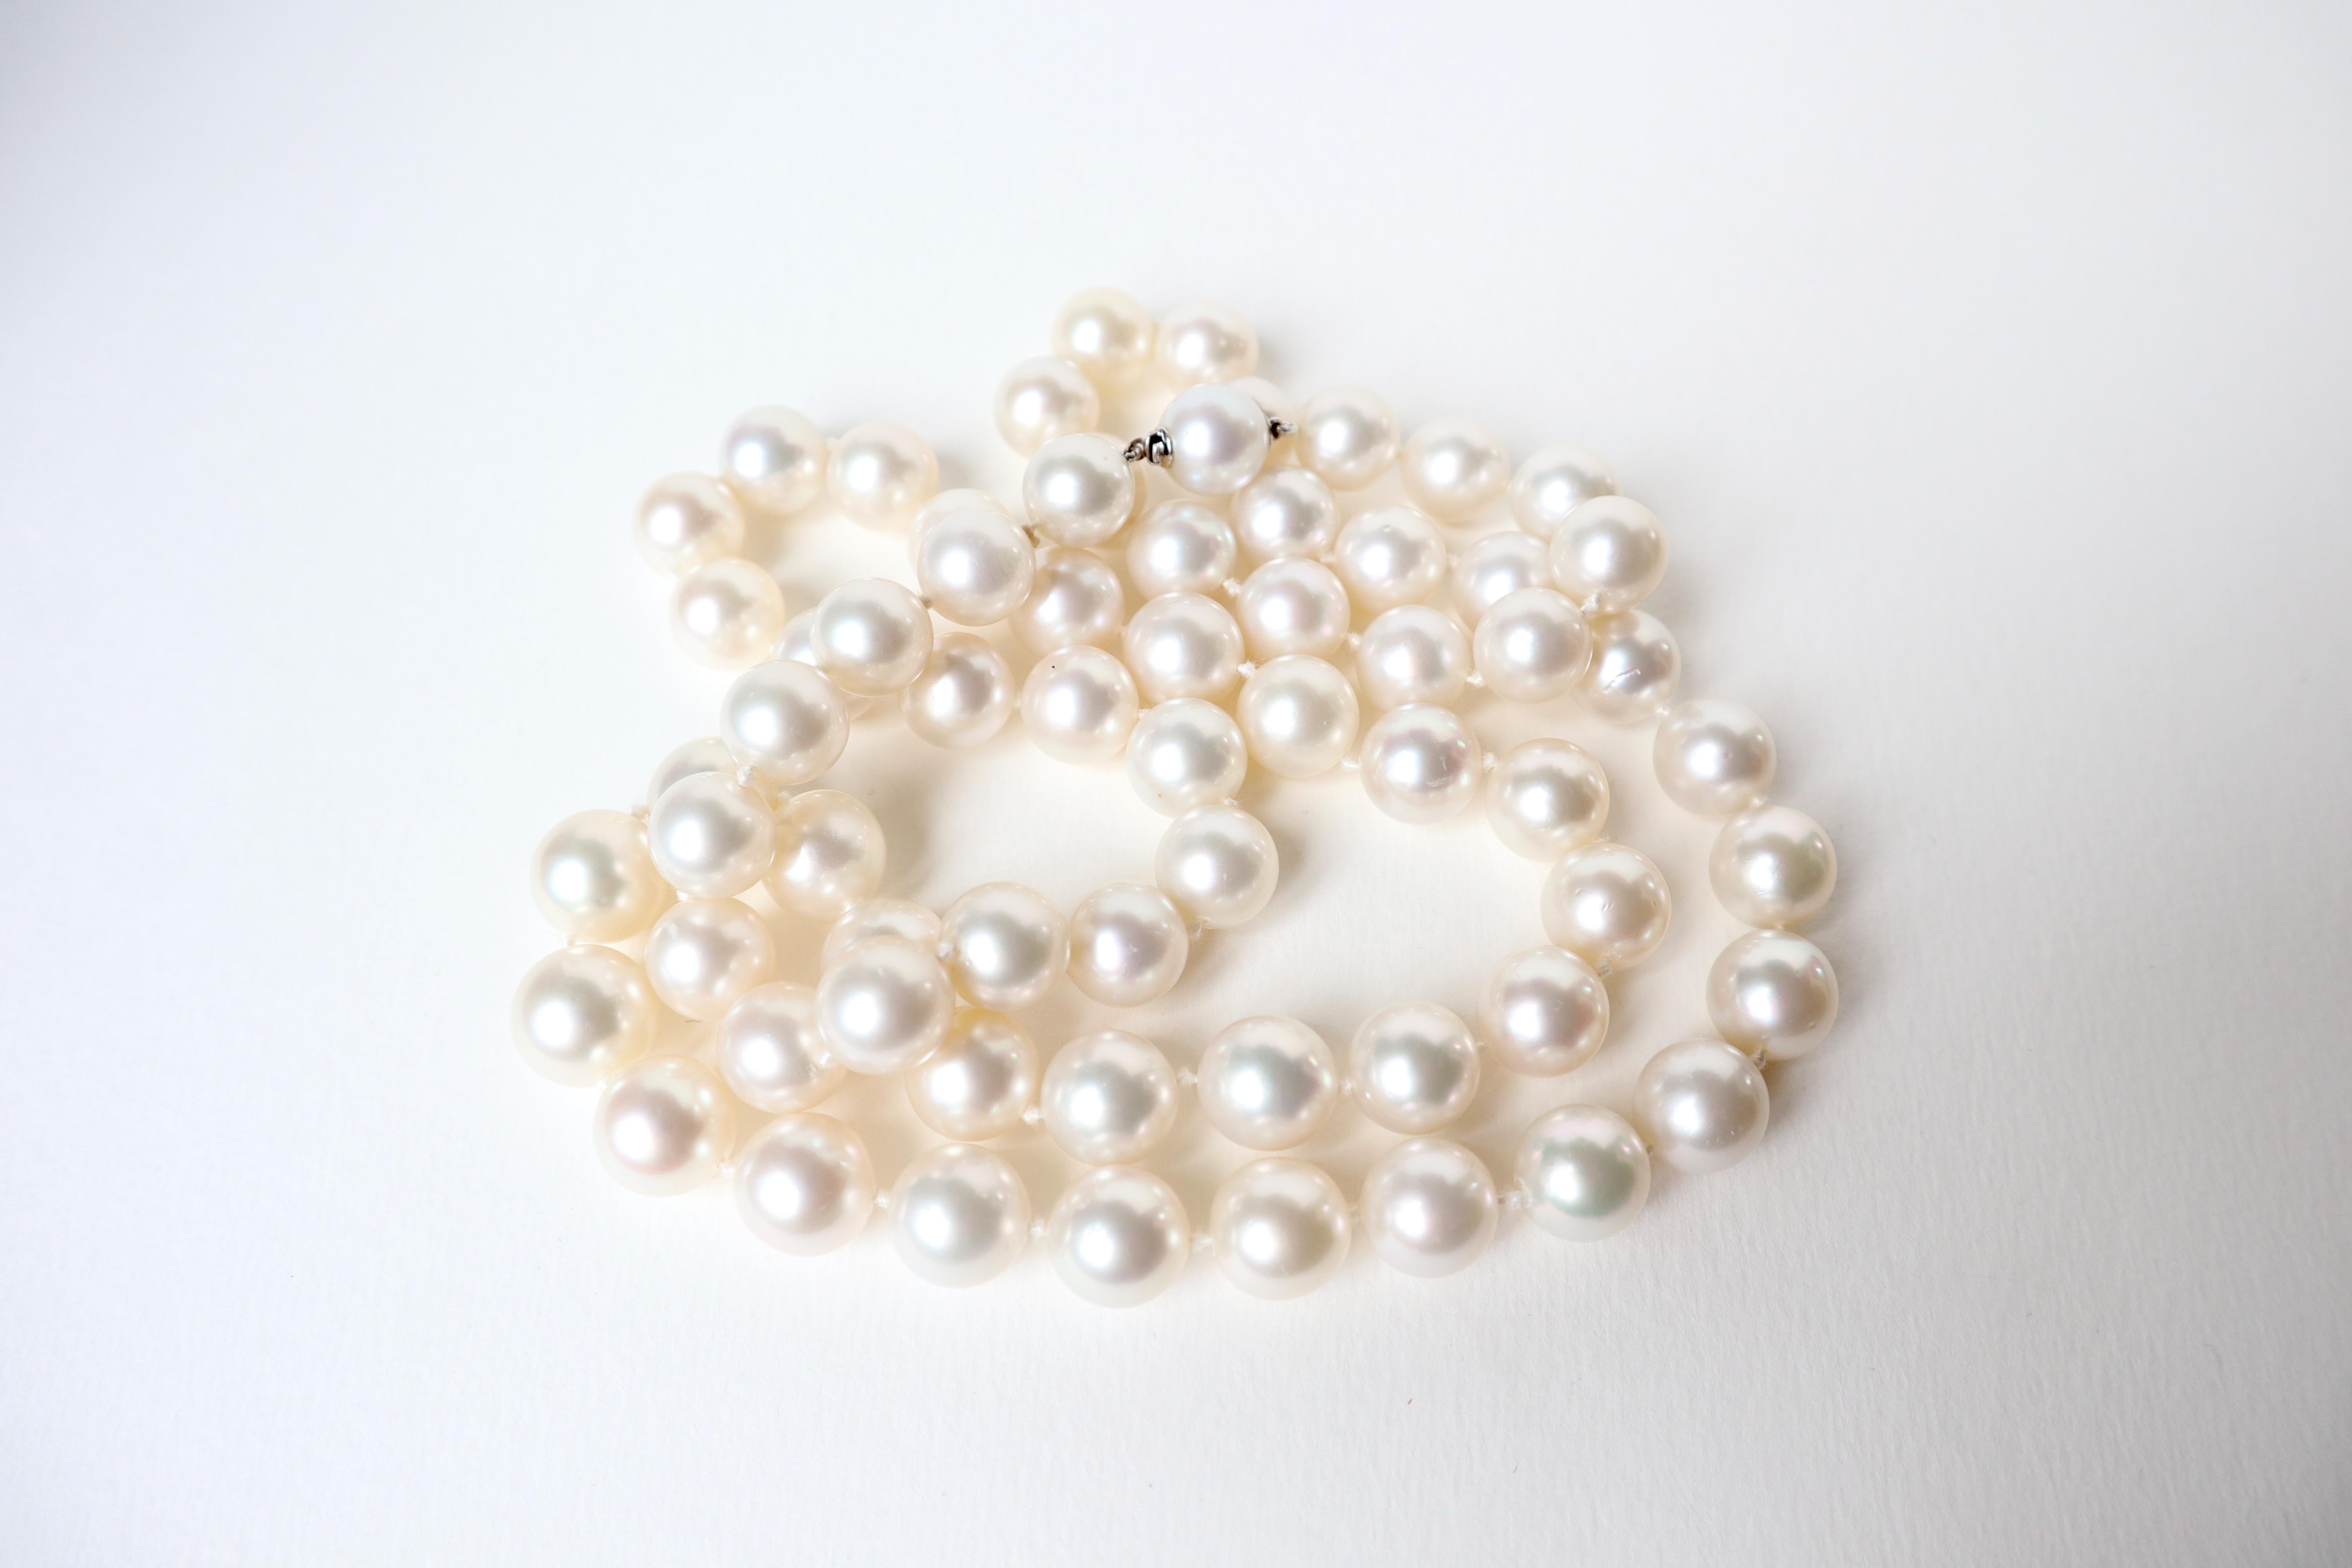 Bead Long Necklace of White Cultured Pearls 12-13mm White Gold Clasp For Sale